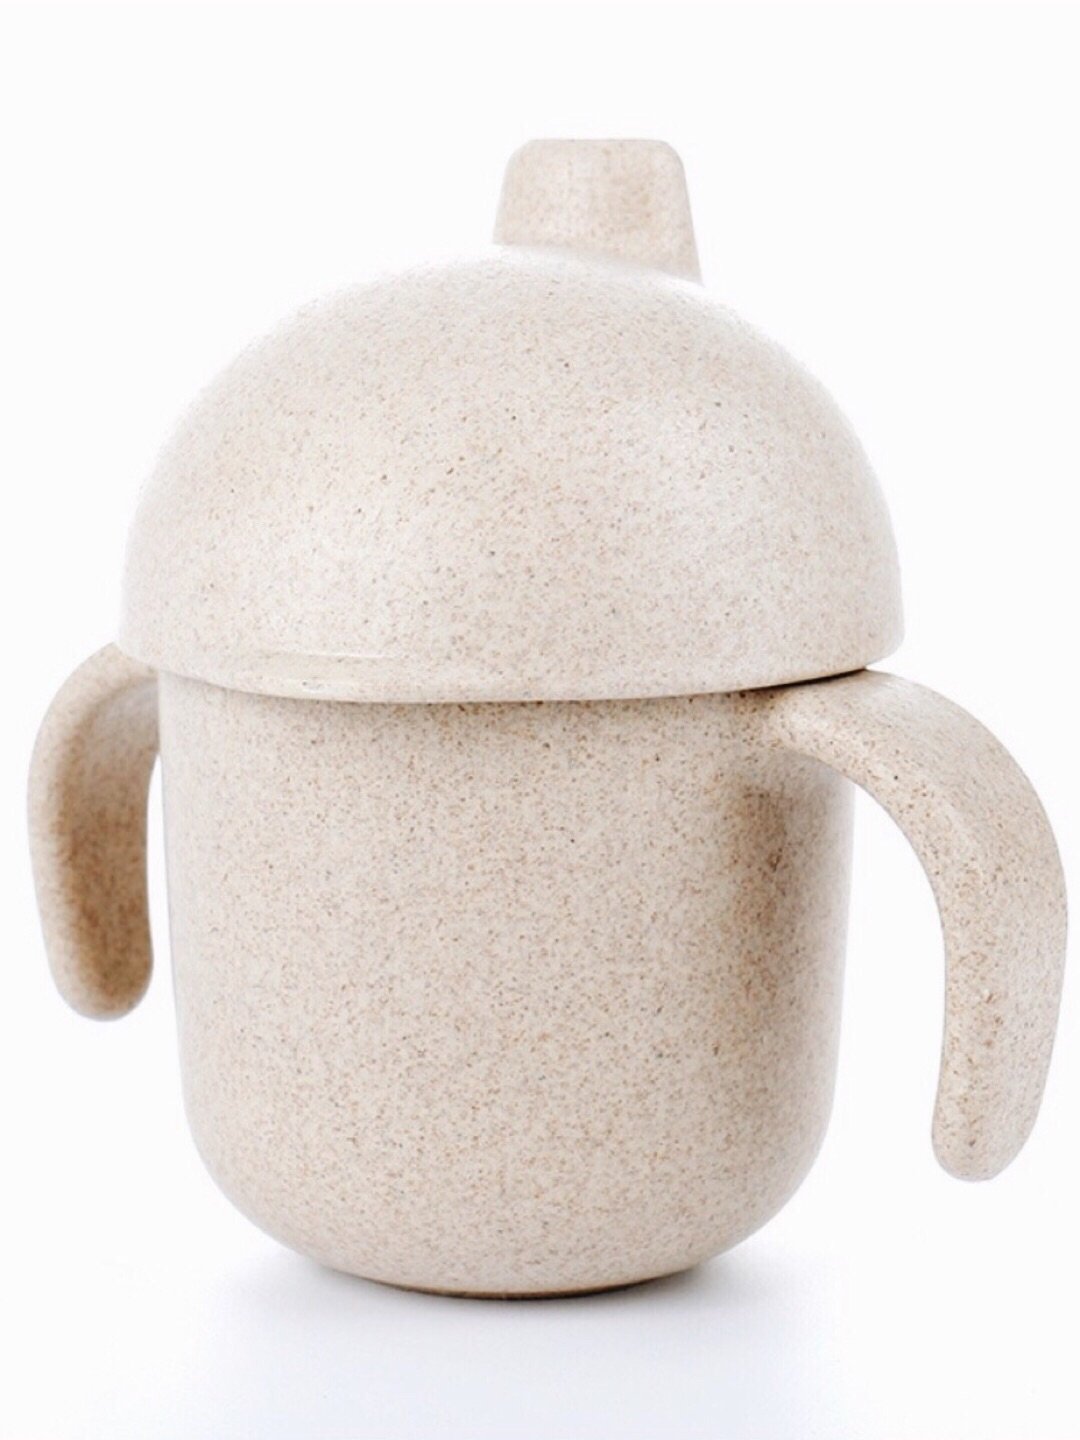 Wheat Straw Sippy Cup - Oat